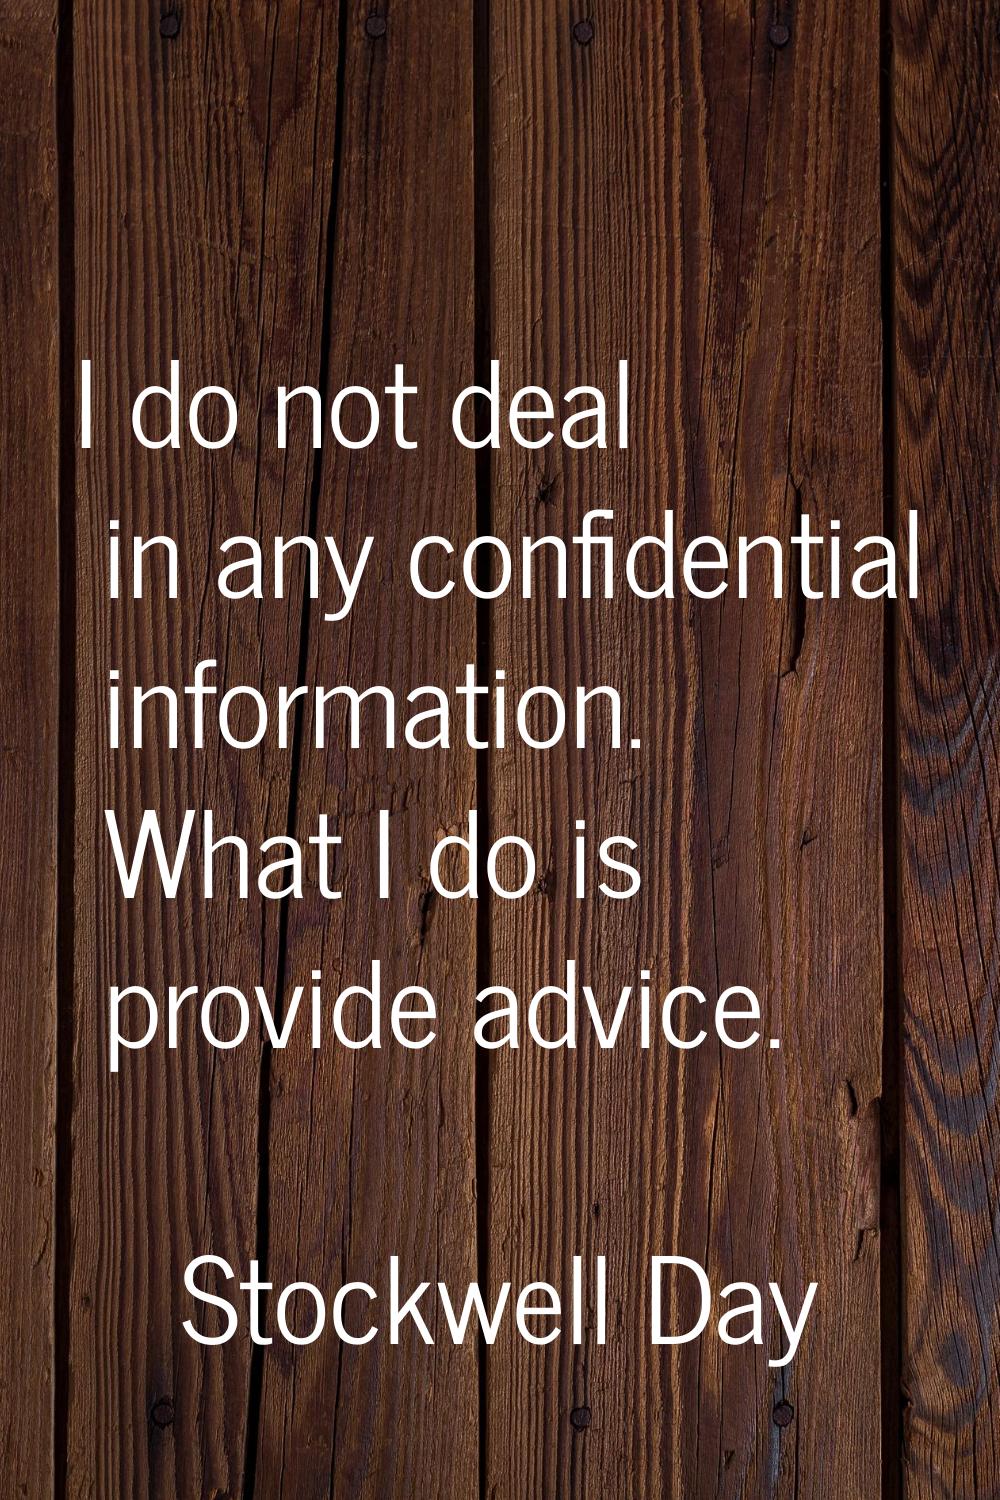 I do not deal in any confidential information. What I do is provide advice.